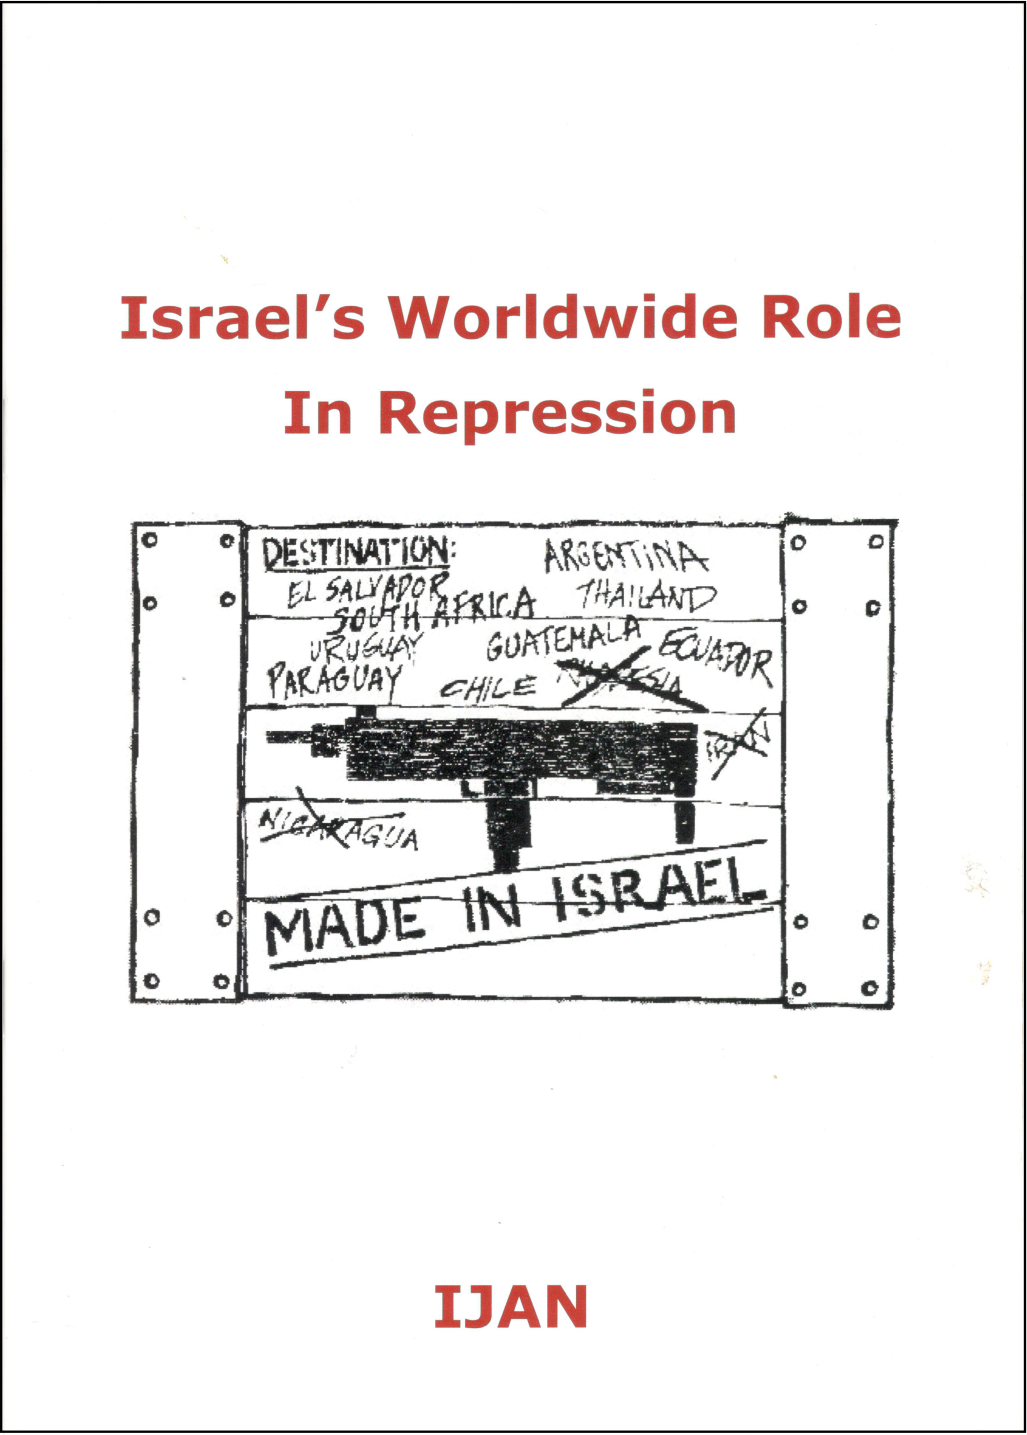 Israel’s Worldwide Role in Repression